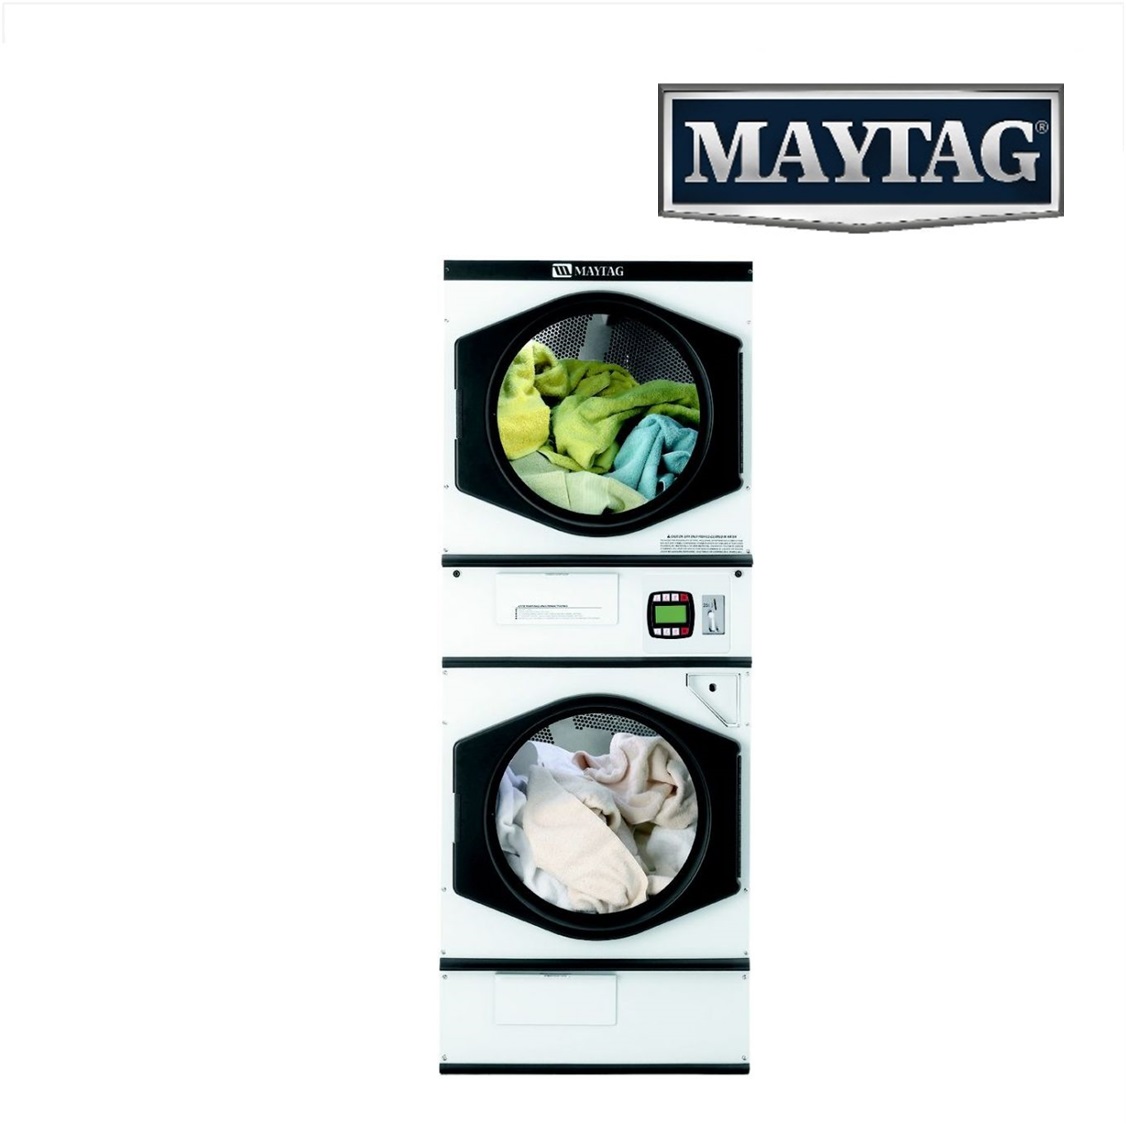 MAYTAG 2 x 13 kgs. Multi-Load Industrial Stacked Dryer & Dryer, Card Reader Ready MLG31PD